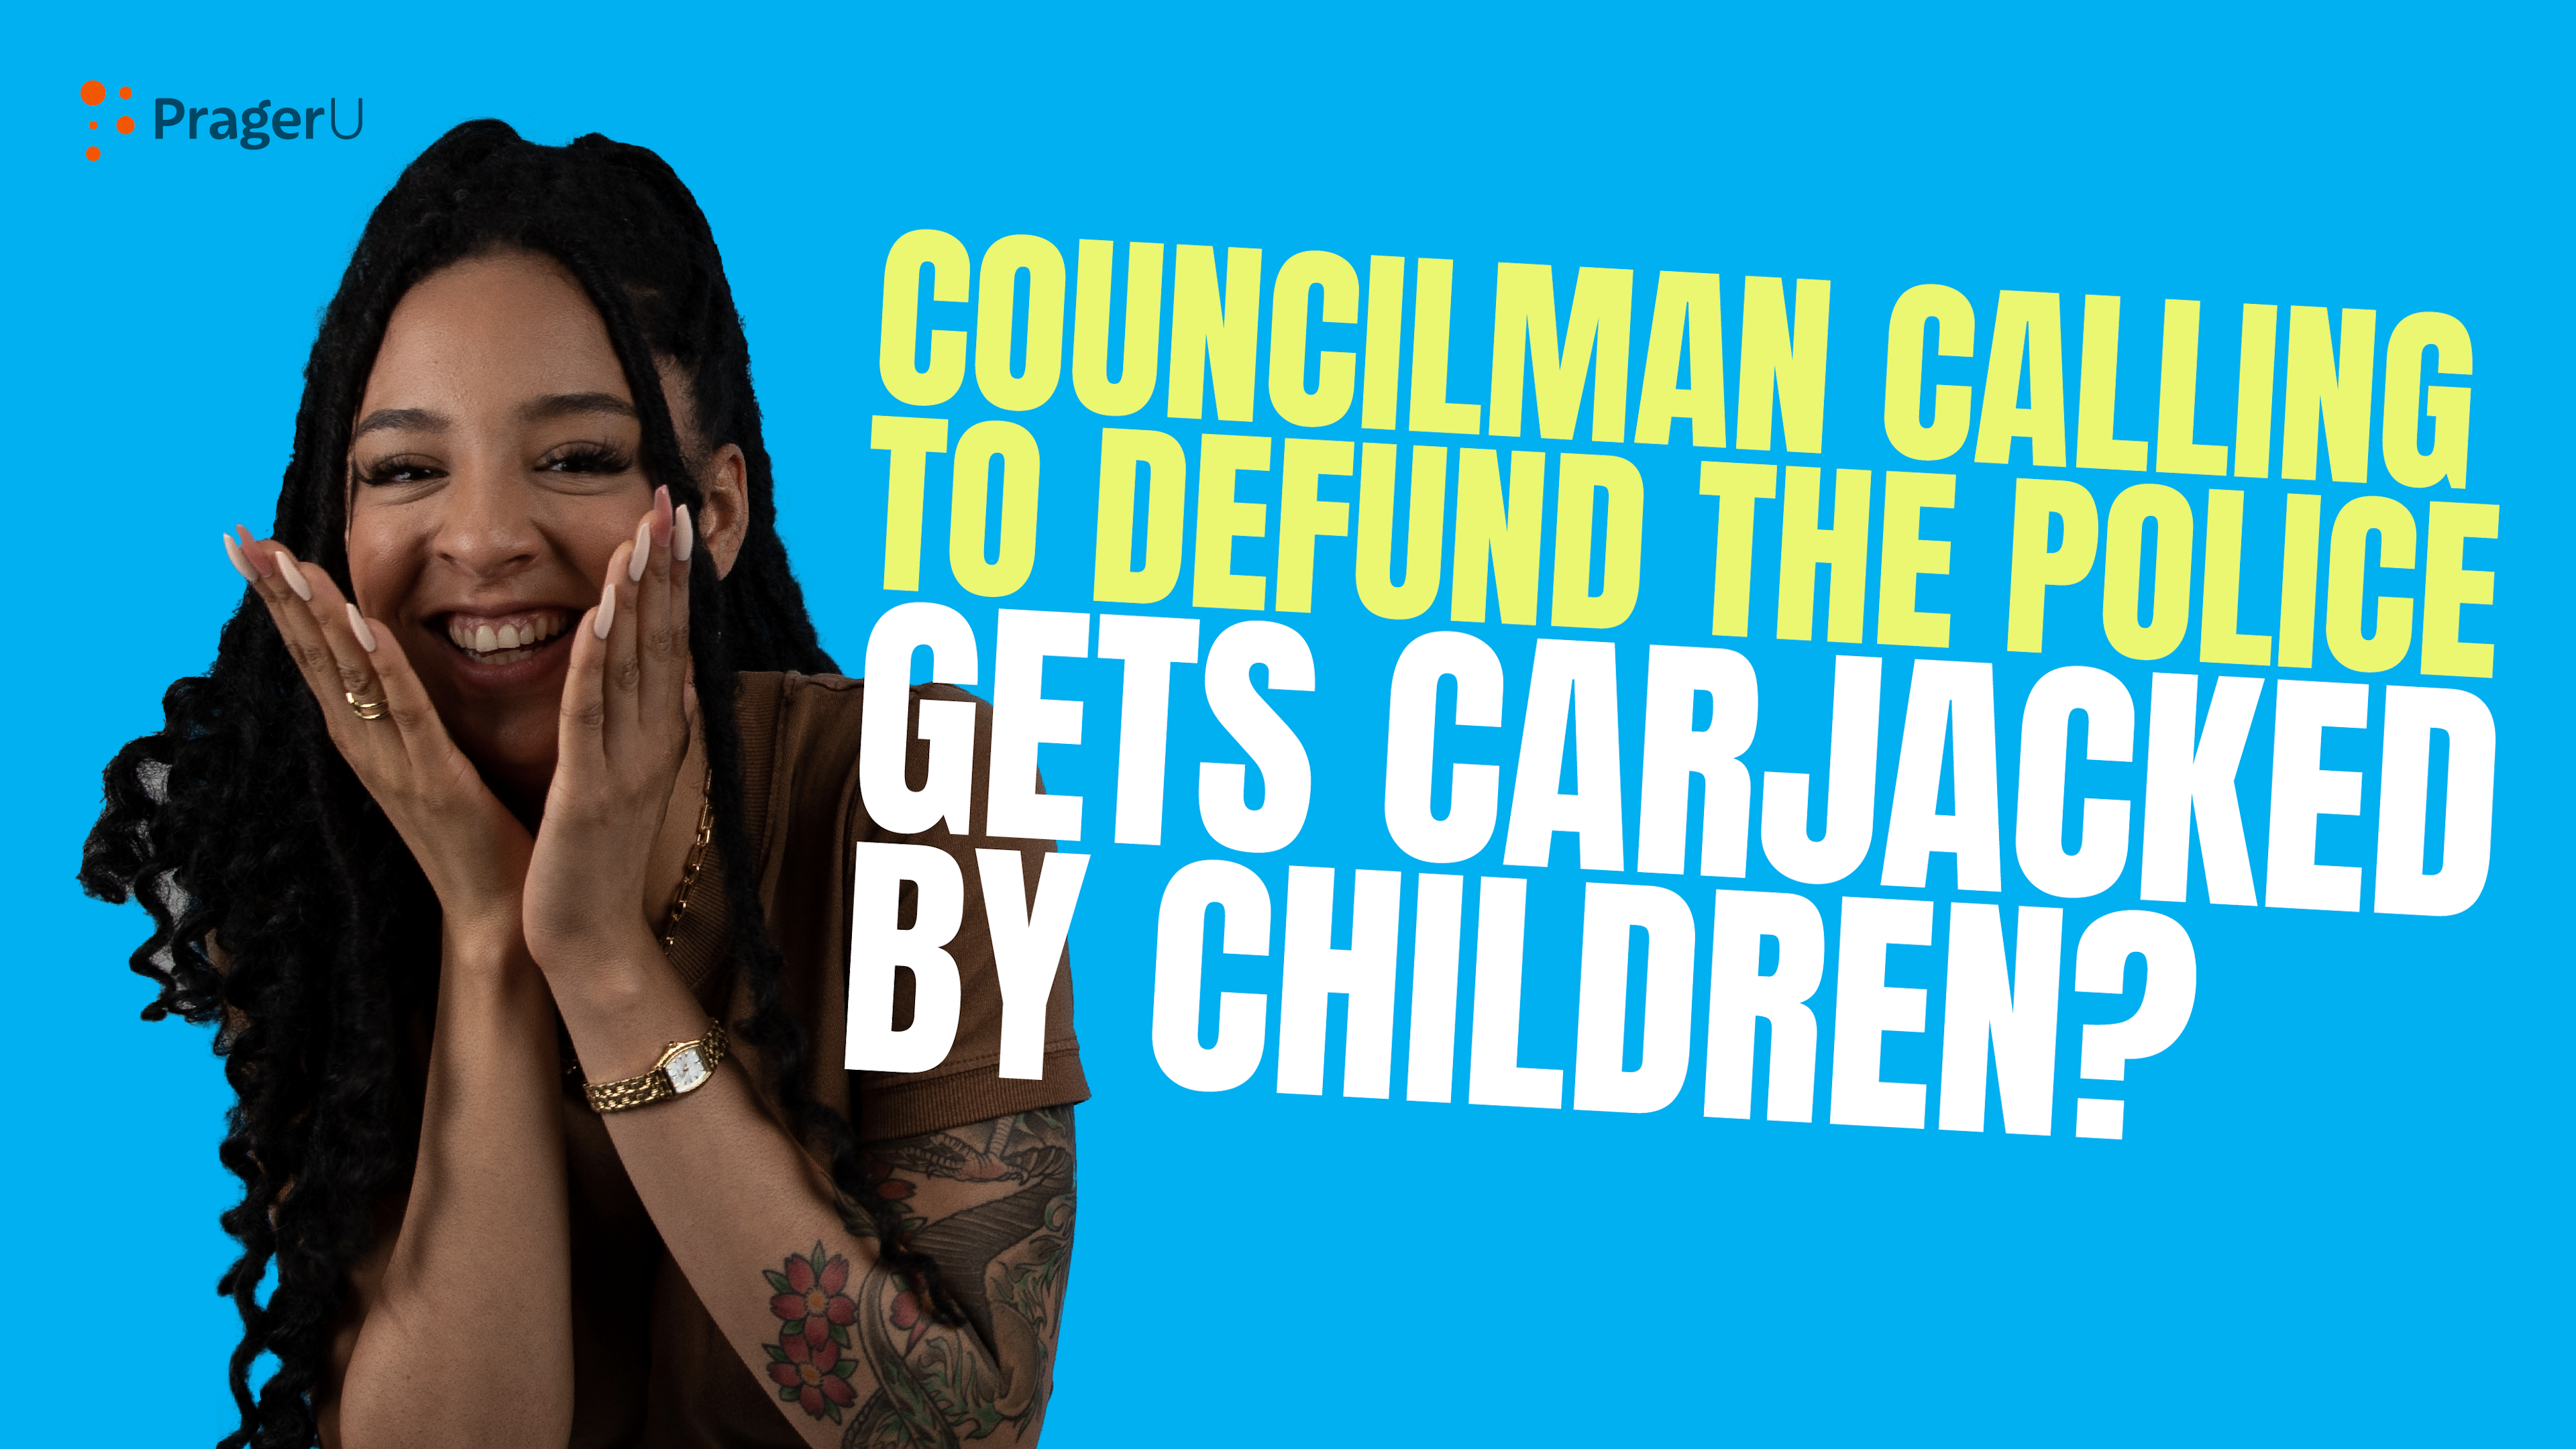 Councilman Calling for Defunding Police Gets Carjacked by Children